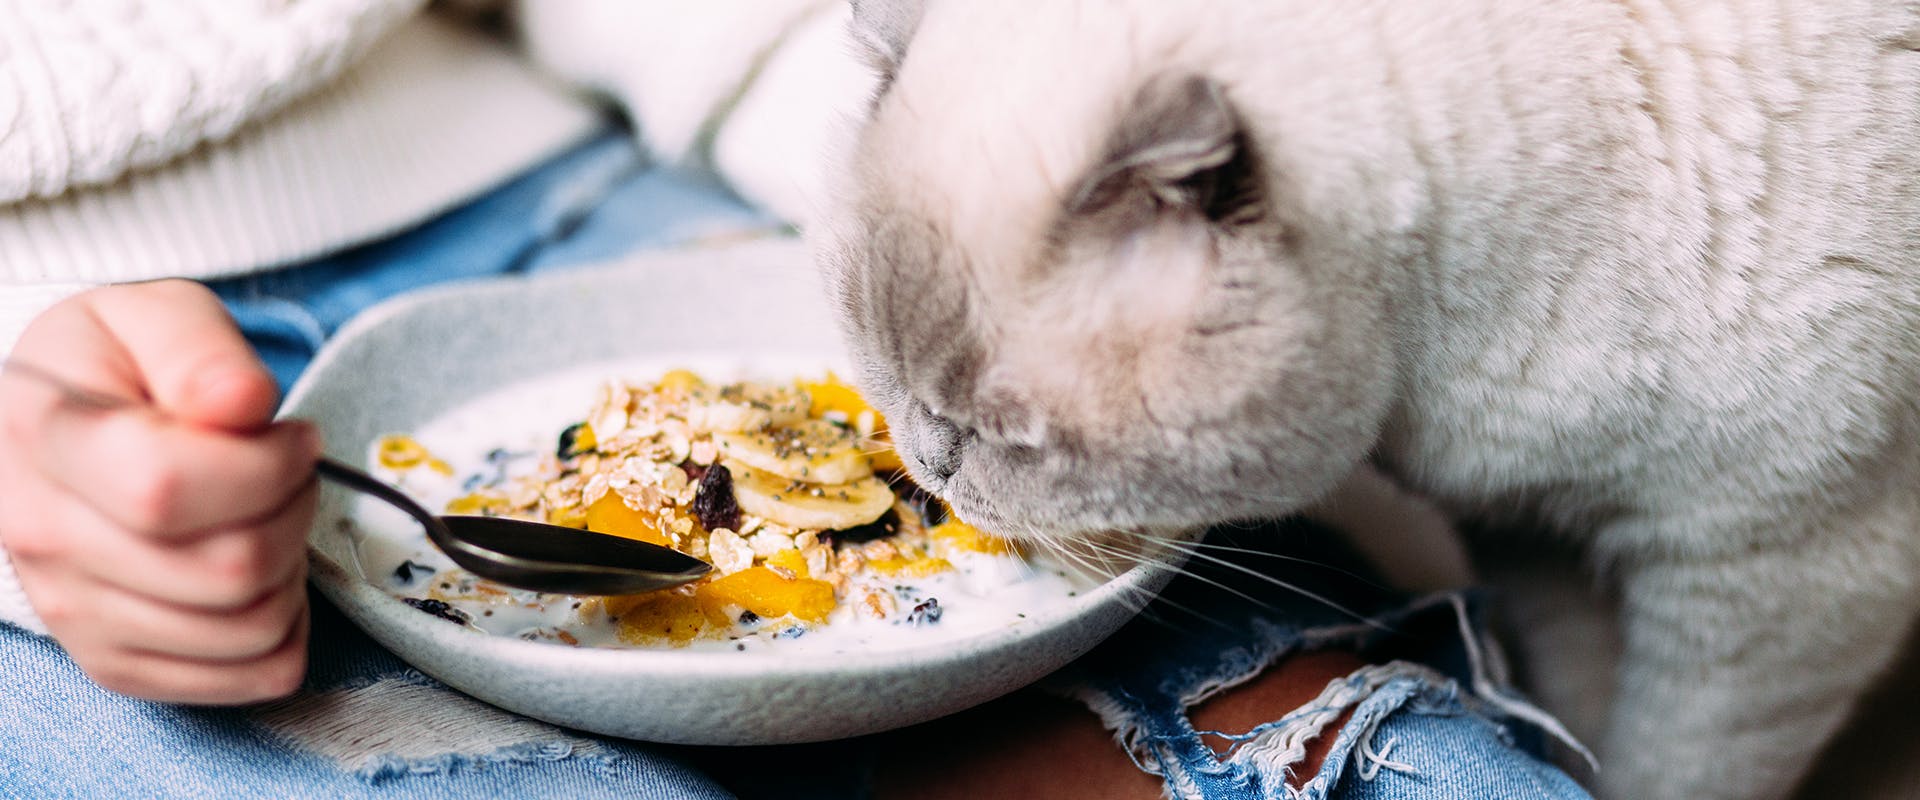 Can cats eat bananas? A cat sniffing at its owner's breakfast, a bowl of muesli with bananas